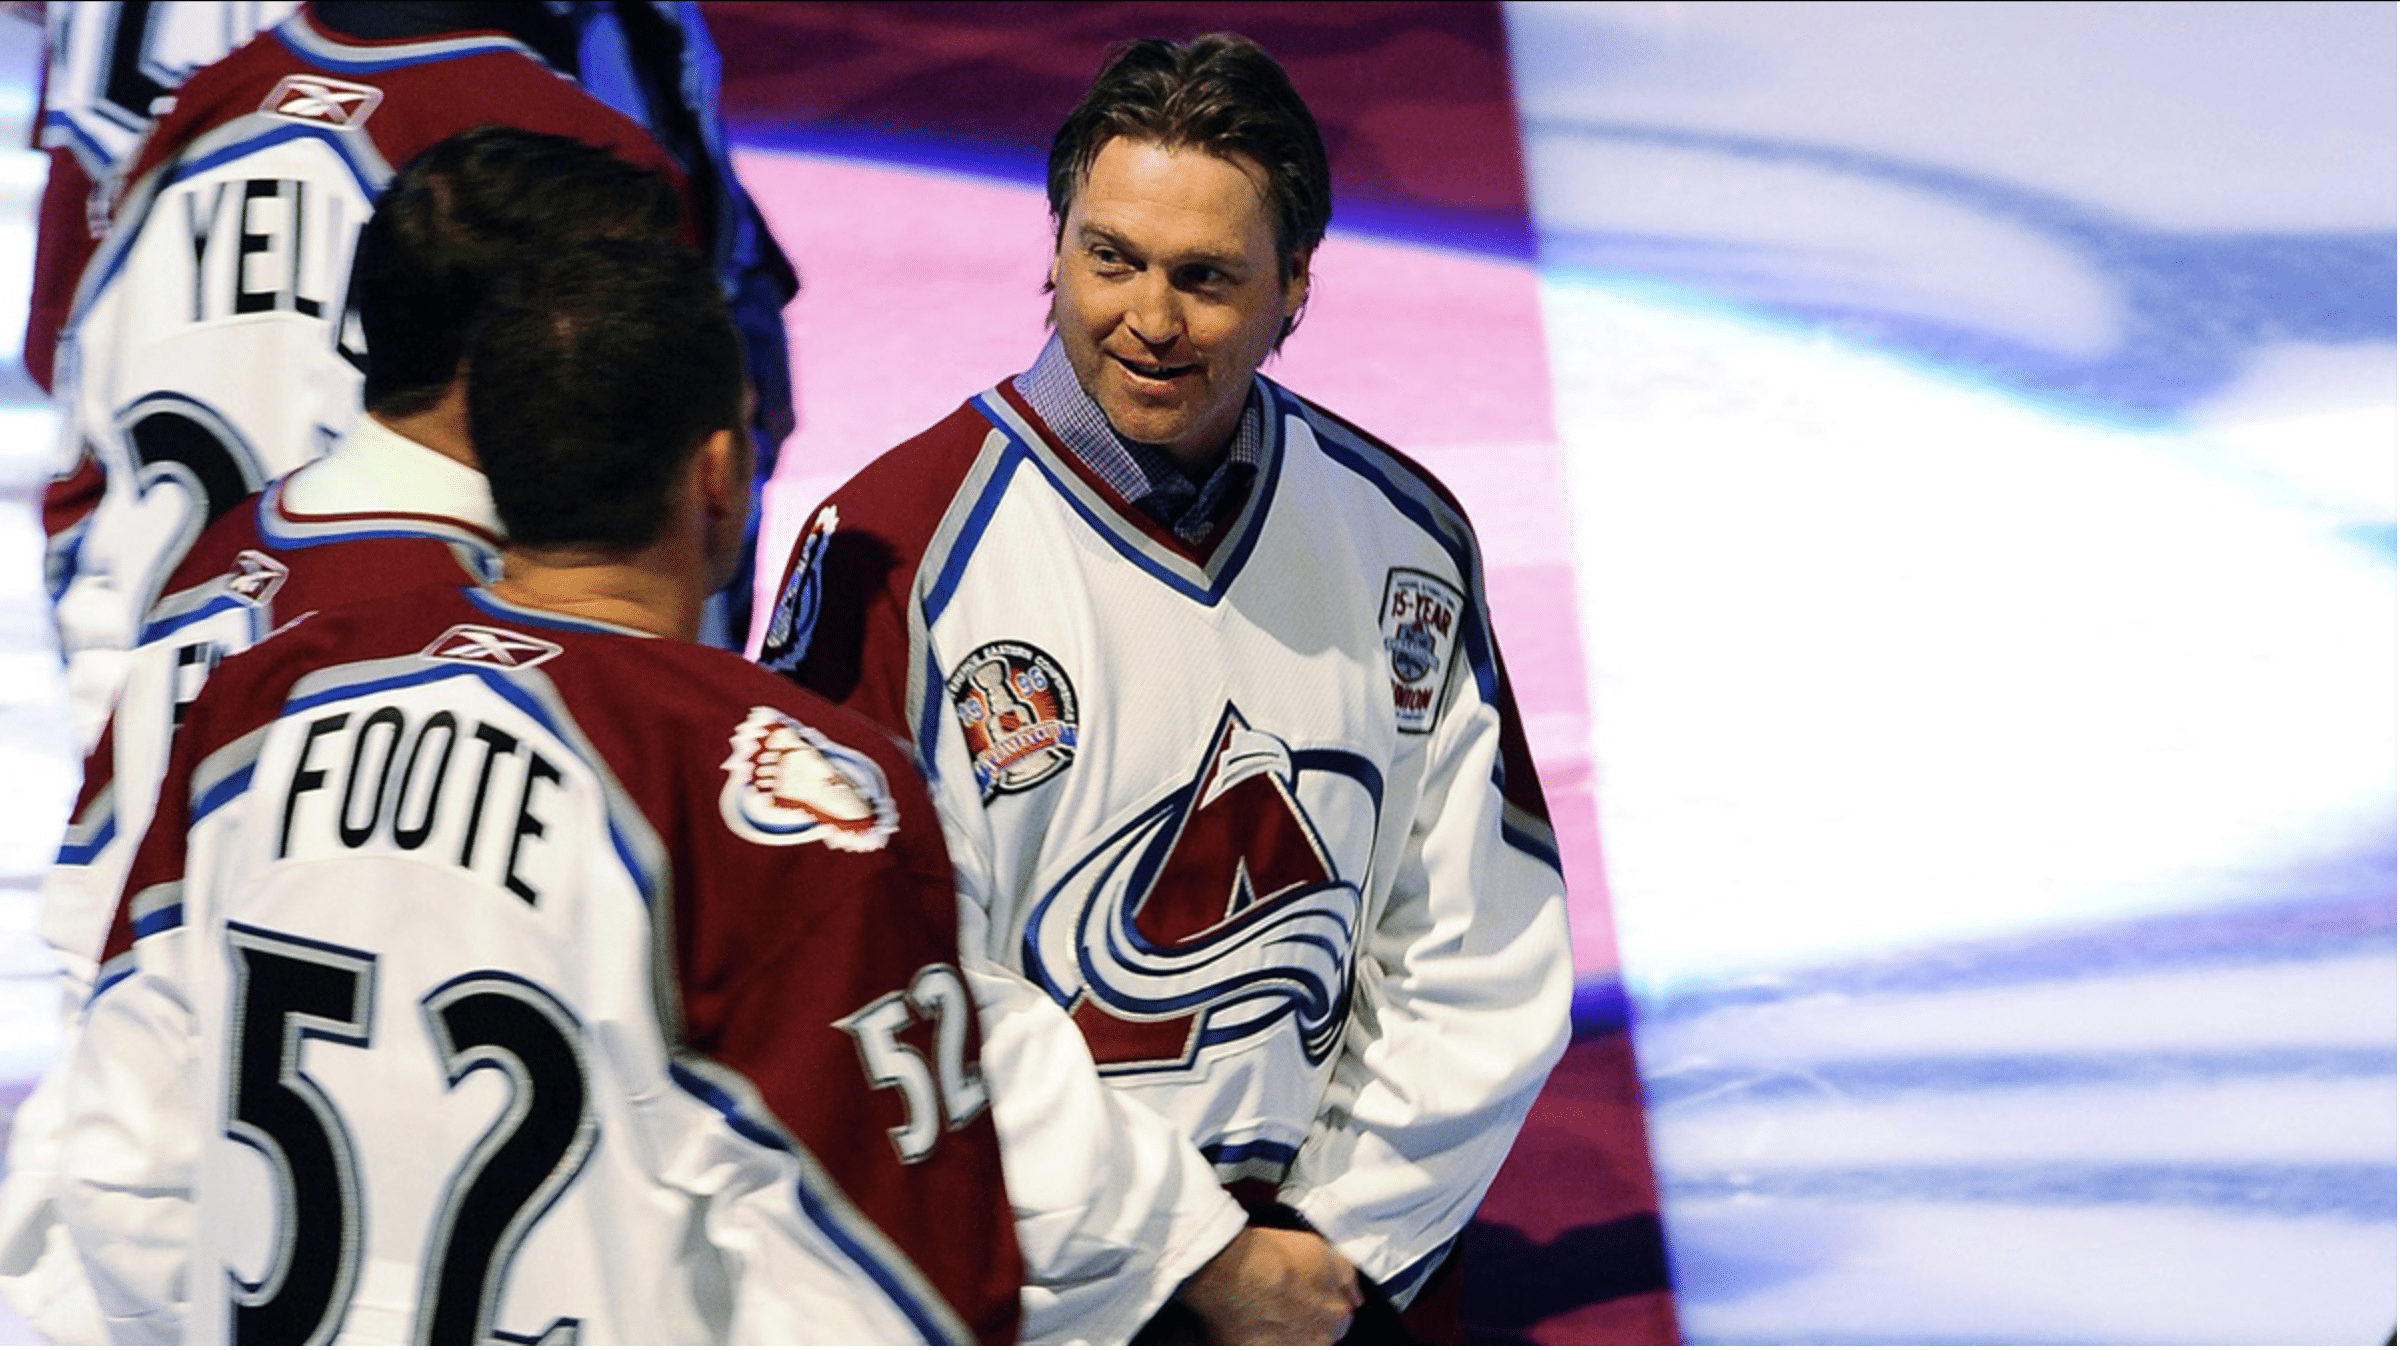 Colorado Avalanche former goalie Patrick Roy (right) and the rest of the 1996 Stanley Cup team are introduced to the fans before the start of the game against the Chicago Blackhawks at the Pepsi Center.